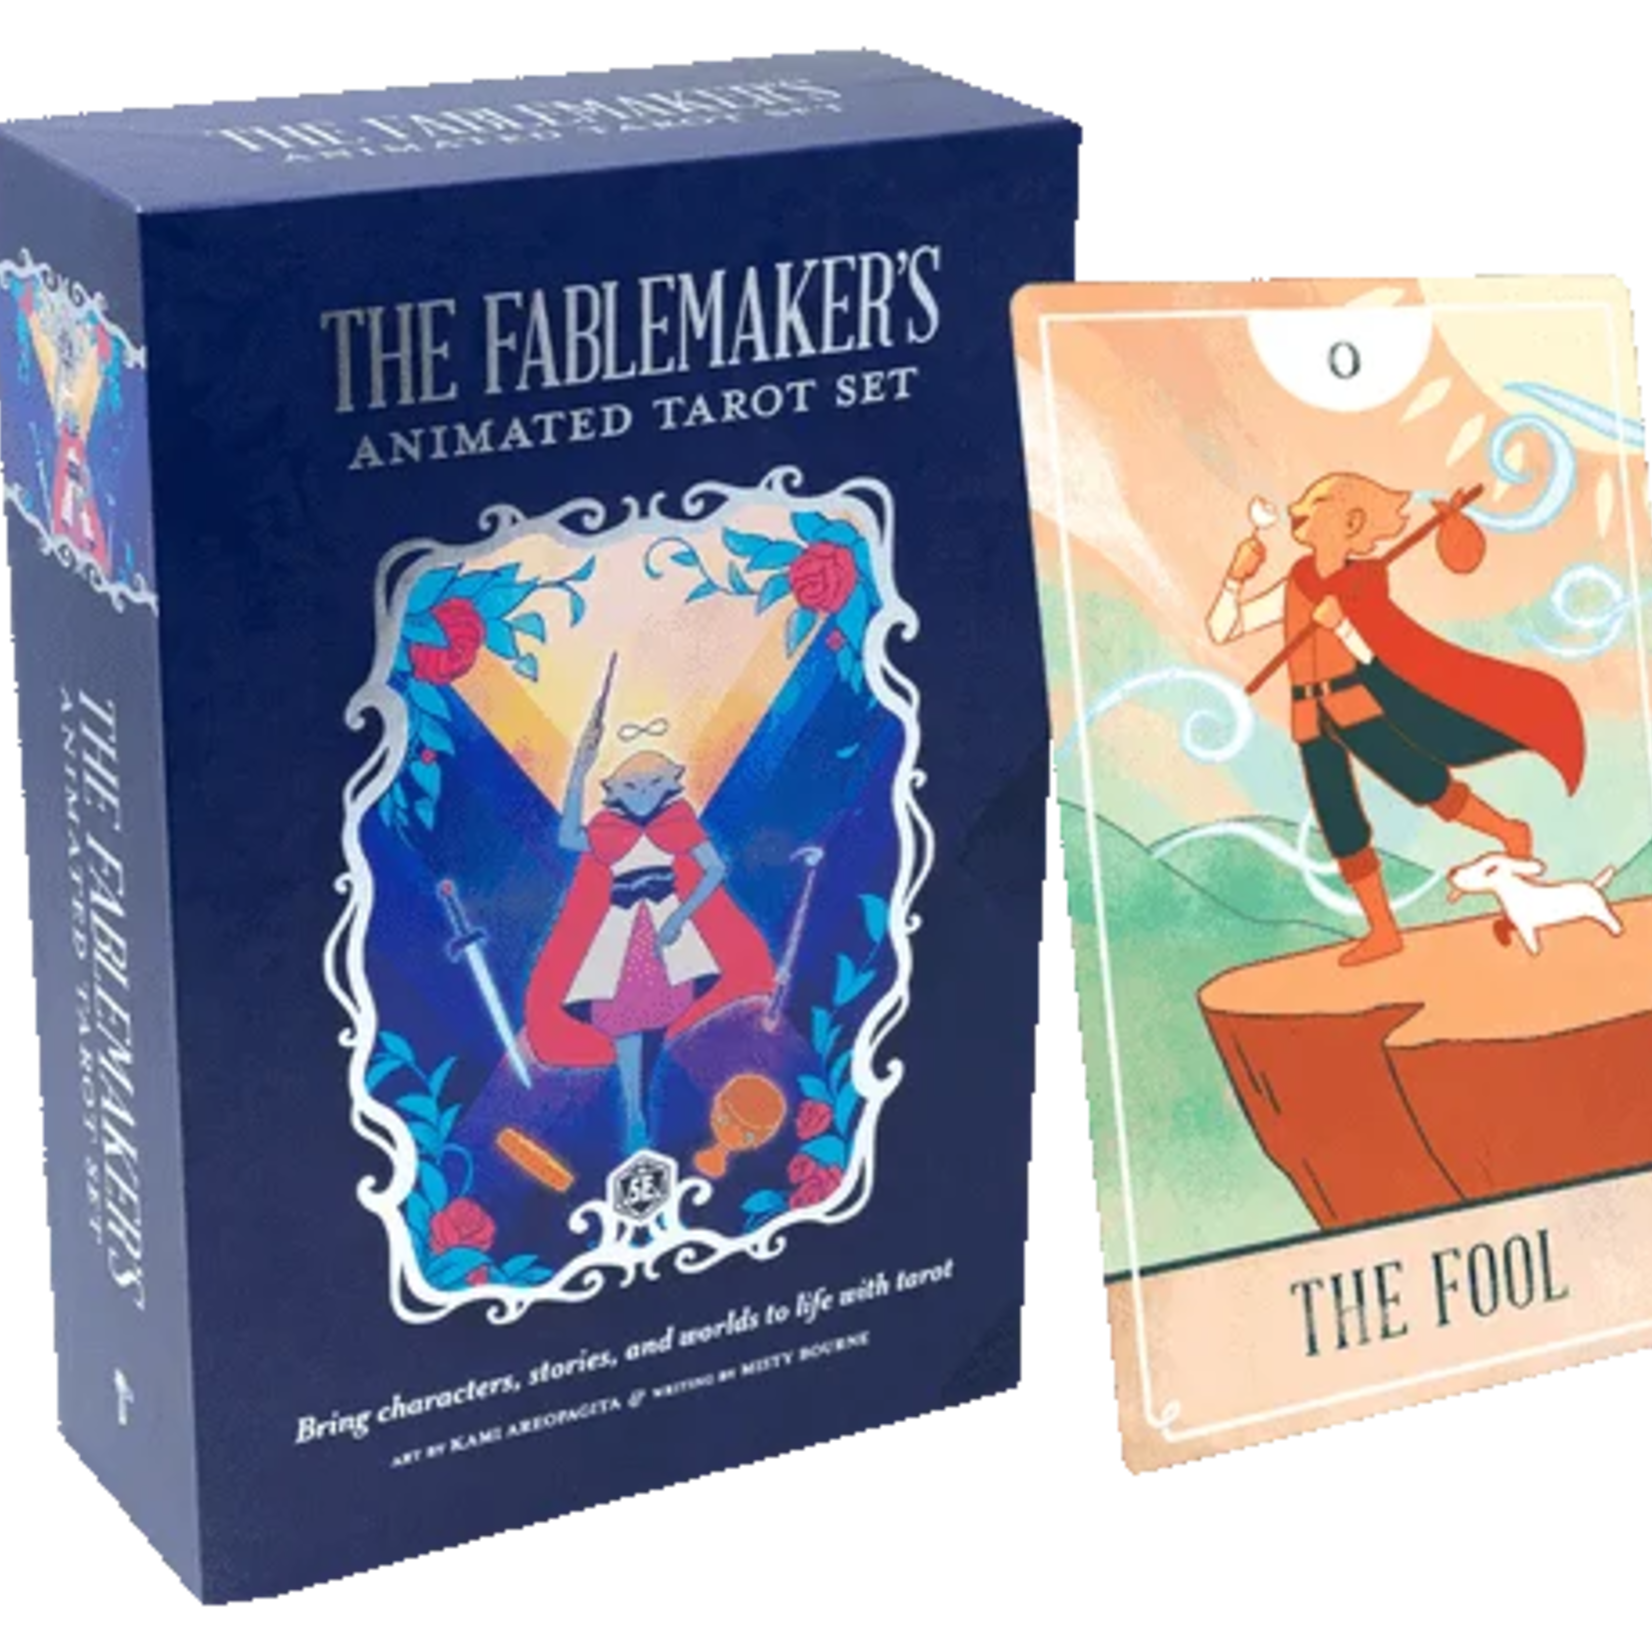 Hit Point Press The Fablemaker's Animated Tarot Deck Box Set